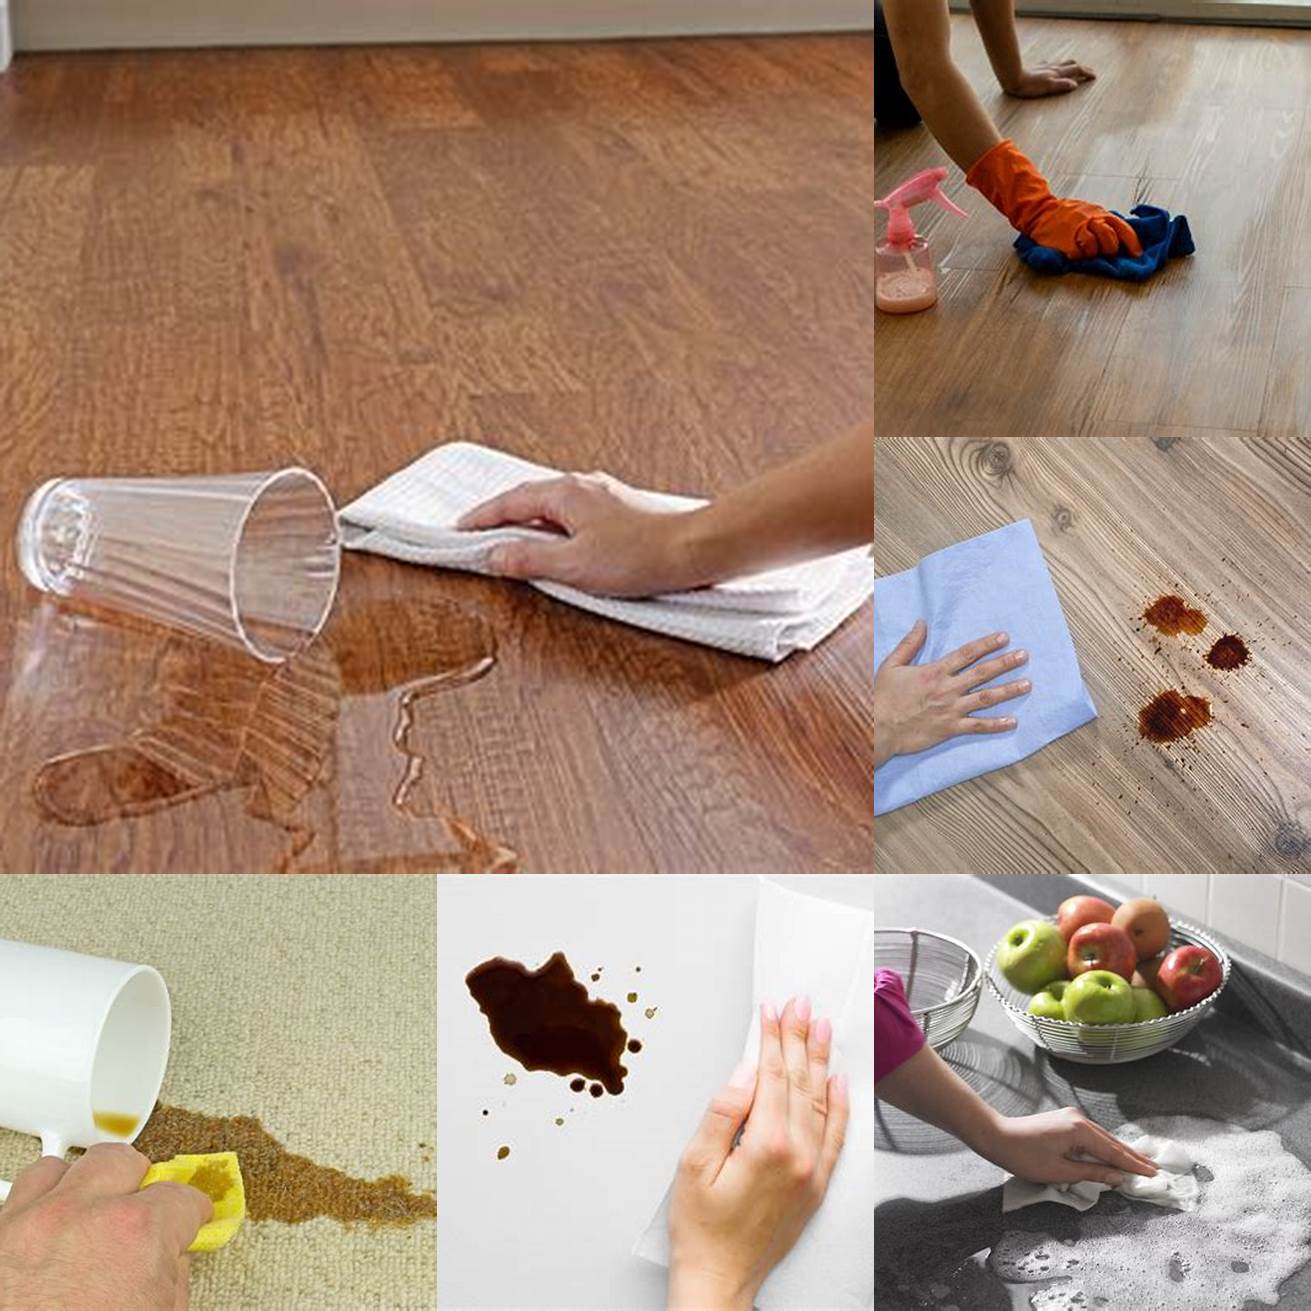 Wipe up spills immediately to prevent damage